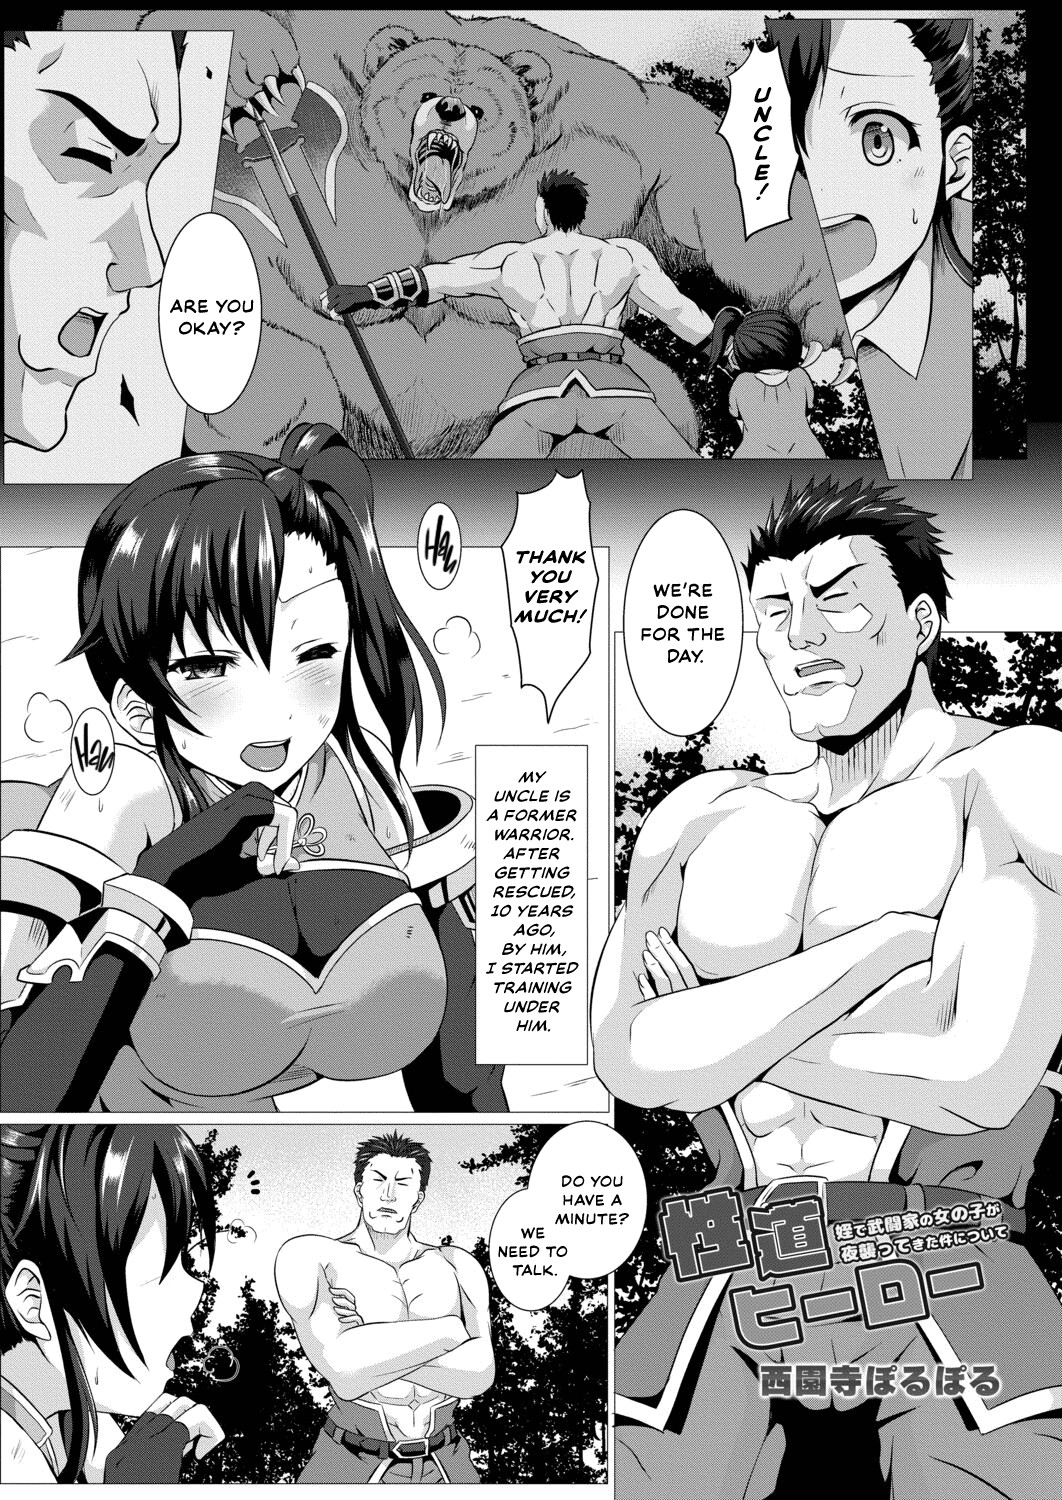 Hentai Manga Comic-Seido Hero 2 About the case where my niece, a girl who is a martial artist, attacked me at night-Read-2